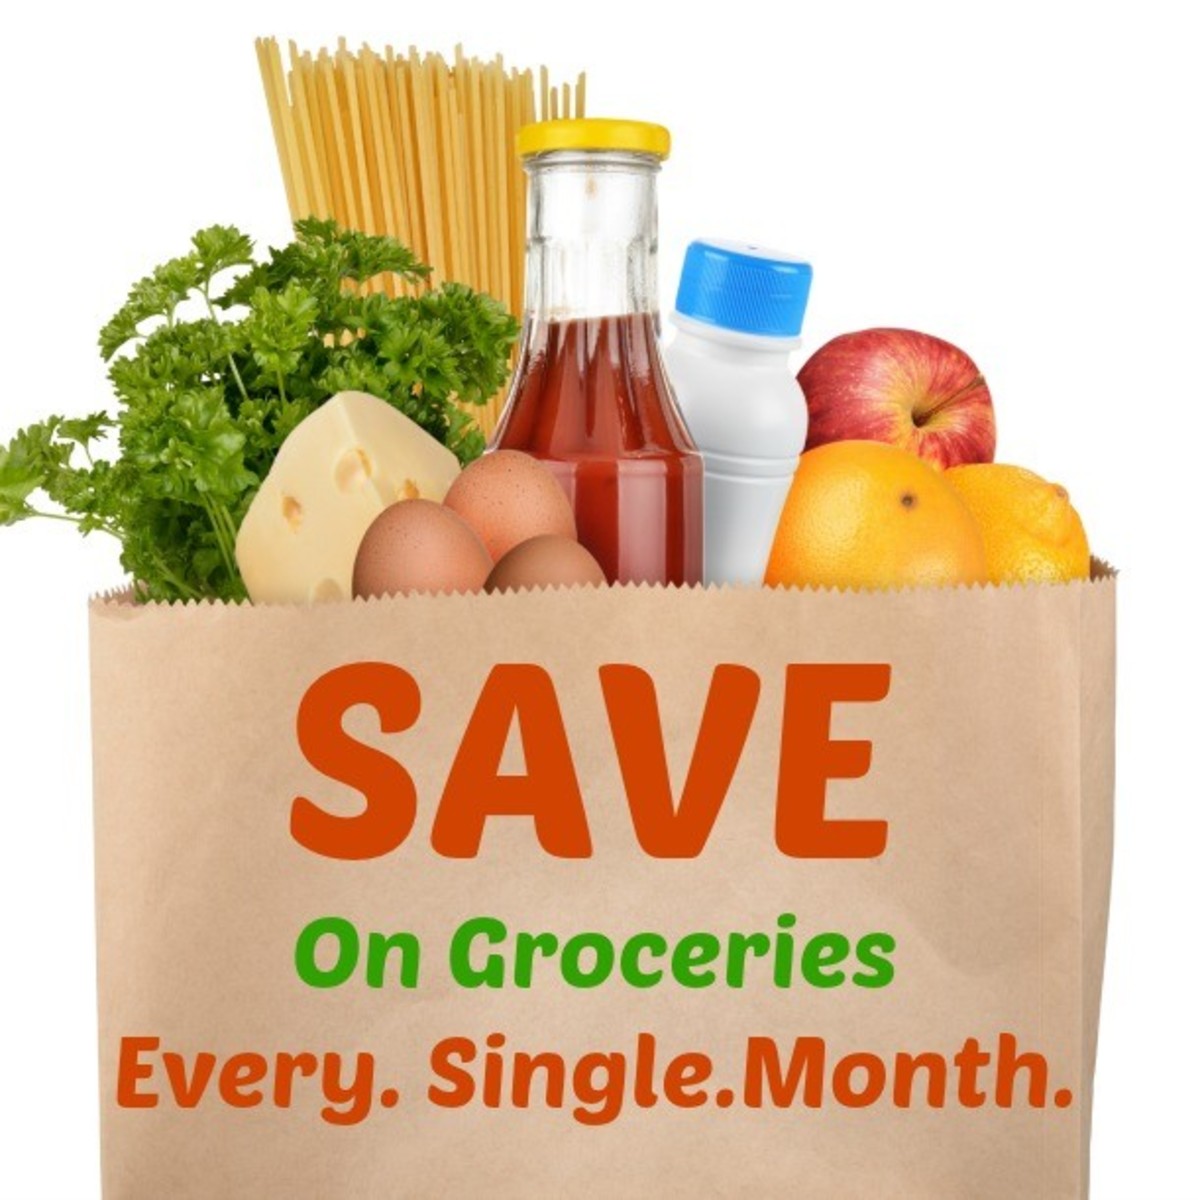 100-smart-ways-to-save-money-on-groceries-every-week